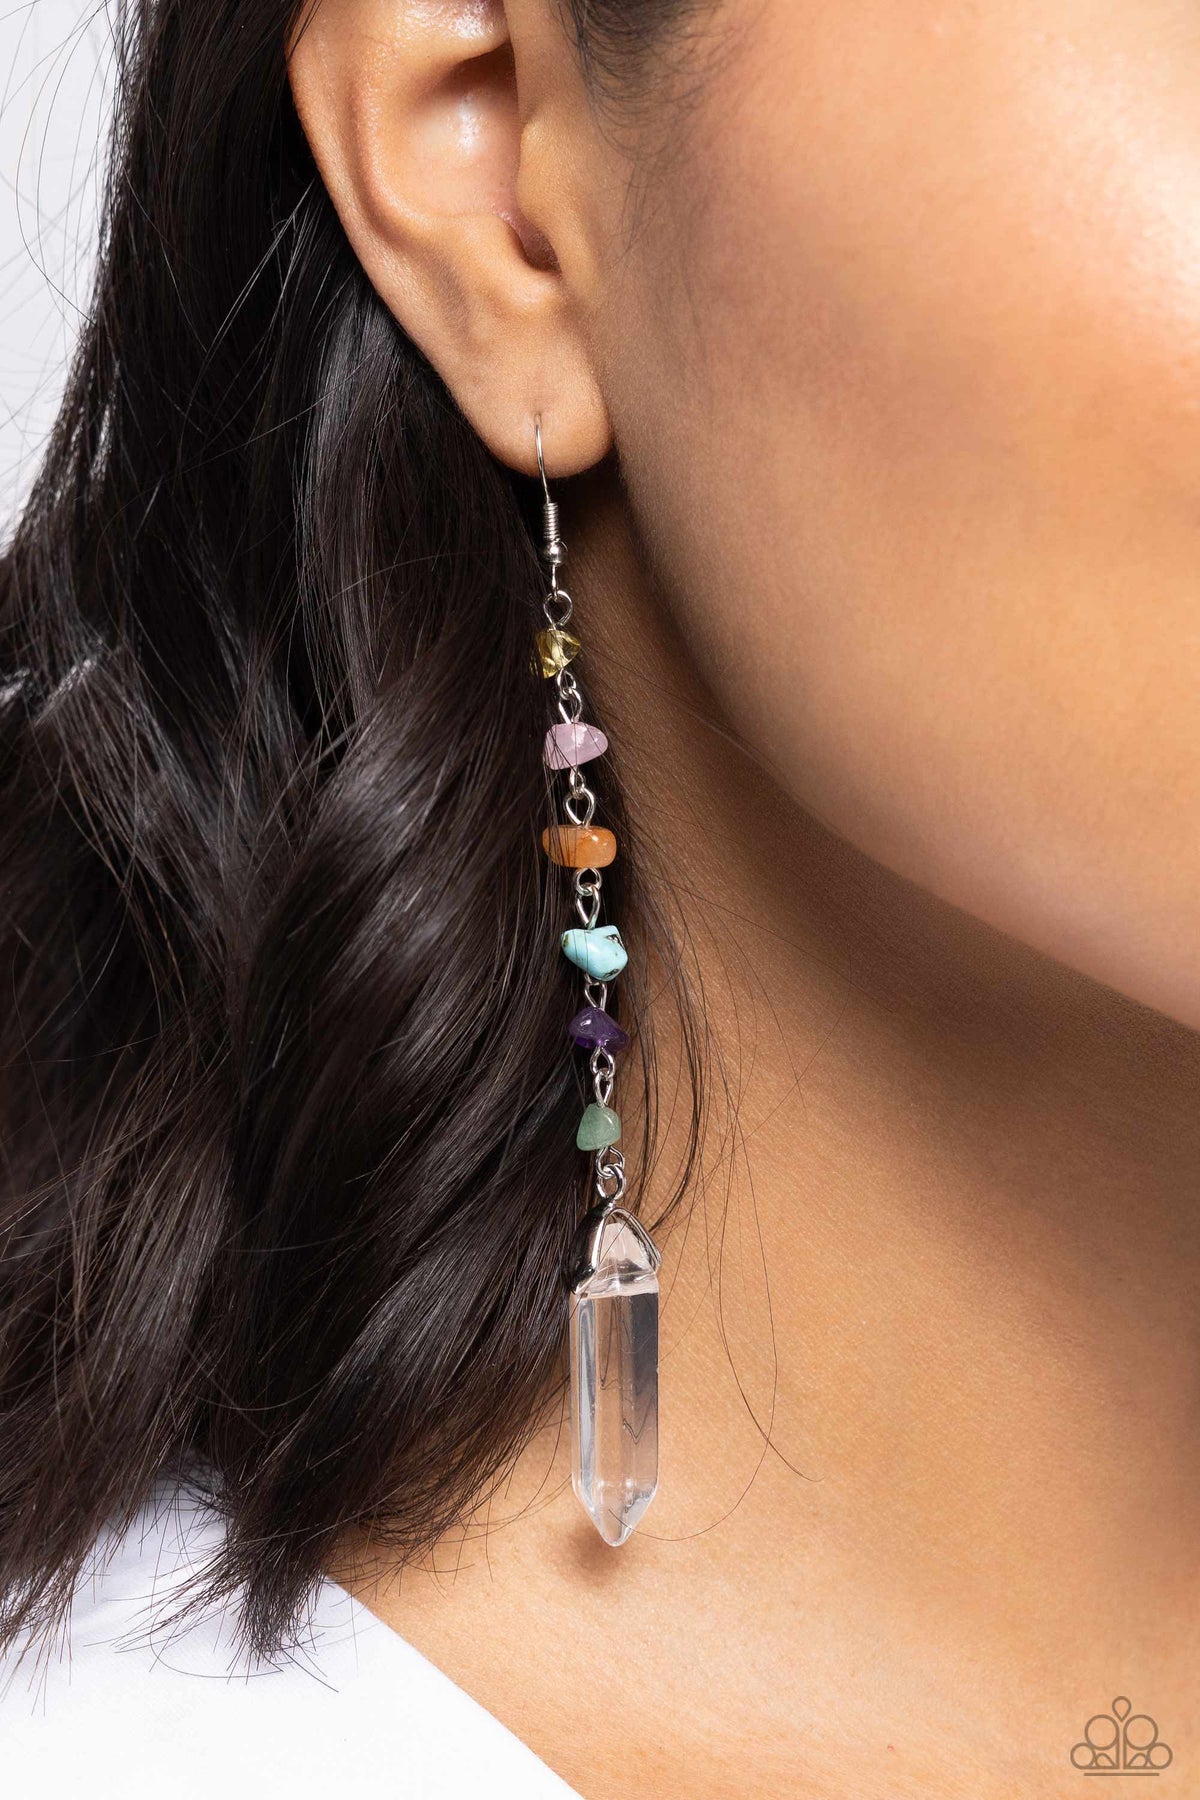 Quartz Qualification Multi Earrings - Paparazzi Accessories-on model - CarasShop.com - $5 Jewelry by Cara Jewels